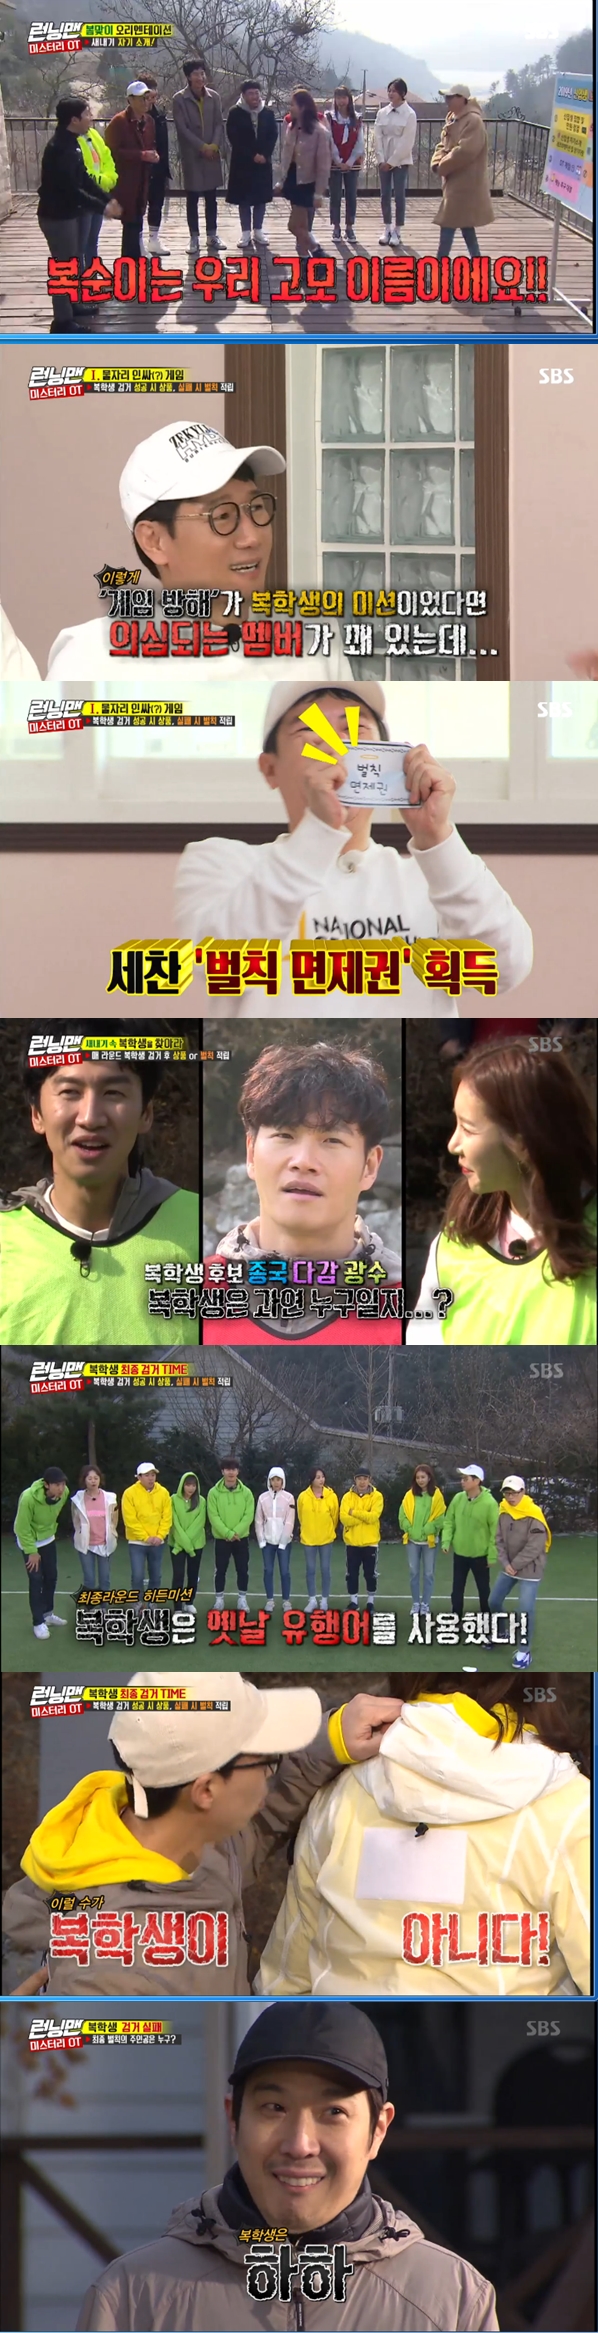 Haha deceived all the members and hid their identity to the end.In the SBS entertainment program Running Man broadcasted on the afternoon of the 10th, Hong Jin-young, Kim Sang-rok, and Han-gam came out as guests and performed Mystery OT Race with the members as a freshman concept.The members introduced themselves to their own characteristics at the opening to match the concept of freshmen. Haha, who came out in a dark fashion that was not like freshmen, gave instant rap with self introduction.The members expected his rap, but he finished short and strong rap with Oti, the tee of jade and bought the members originality.Ji Suk-jin then introduced himself as I am a fast 99-year-old. So Yoo Jae-Suk shouted Is it born in 1899? And laughed.The members welcomed her when the last appearance of the show appeared.At this time, Yoo Jae-Suk said, It is now a feeling of doing. She told her about her name, and the members asked why.I changed it to get to people with a friendly attitude, Haha said. I could not change it to something else.Boksun is our aunts name, he said, making Haha embarrassed.The first round game was played as an in-sac game to the concept of freshmen; the members caught in the game had to drink the Kalamancy juice, and the least-accepted person was given a penalty waiver.The first game started with an orange game. In the first game, I felt like I was throwing an unreasonable number and went to the next game.Then, I went on the game of Orange Fart, and I was penalized because I did not make a sound here.The last Insa Game was a K-pop game; the members had to sing a K-pop song that fits the given Jessie.However, the members only sang songs that were more than 10 years old, not the latest songs to match the given Jessie.Ji Suk-jin called Meeting by Noh Sa-yeon and Lee Kwang-soo called Buzzs Do not Know a Man and showed a 19th grade record.K-pop Game became a time to sing songs in memories in sleep, and Kim Jong-kook laughed when he said, Its like a family entertainment hall, not an in-same.The least-acquired person in the ongoing InsaGame was Yang Se-chan, who obtained a penalty waiver.On the other hand, after the first round, the members Choices as a returning student.The crew said the returning student failed the Hidden mission, and the members pointed to Ji Suk-jin and Haha as suspicious people.Among them, the Choices of the members were concentrated on the K-pop game as they sang the old song.In the second round of the game, a candidate for a return student was selected. In the second round of the three-game Jimball Game, the returning student was ordered not to win the first prize with the Hidden Mission.Lee Kwang-soo and Hangam, Haha, produced a lot of suspicious situations, and the members doubted the three people at the end of the production team that they succeeded in the mission.In the situation that they should not be paired with the returning student for the final round, the members sought a mate from the returning student candidate; eventually, only the feeling that they were suspected of being the most returning student was not paired.Han Da-gam was arrested for returning students twice in a row.In the last three rounds, Kim Jong-kook and Song Ji-hyo won the mens and womens championships, respectively, and received penalty exemption.In the last round, the Hidden Mission of the returning student was using the old buzzword, and Haha, who said Capchan during the game, was suspected of returning, but the members pointed out that he was doing it at the end.But she was not a returning student, and Haha was the main character of a returning student who deceived the members.